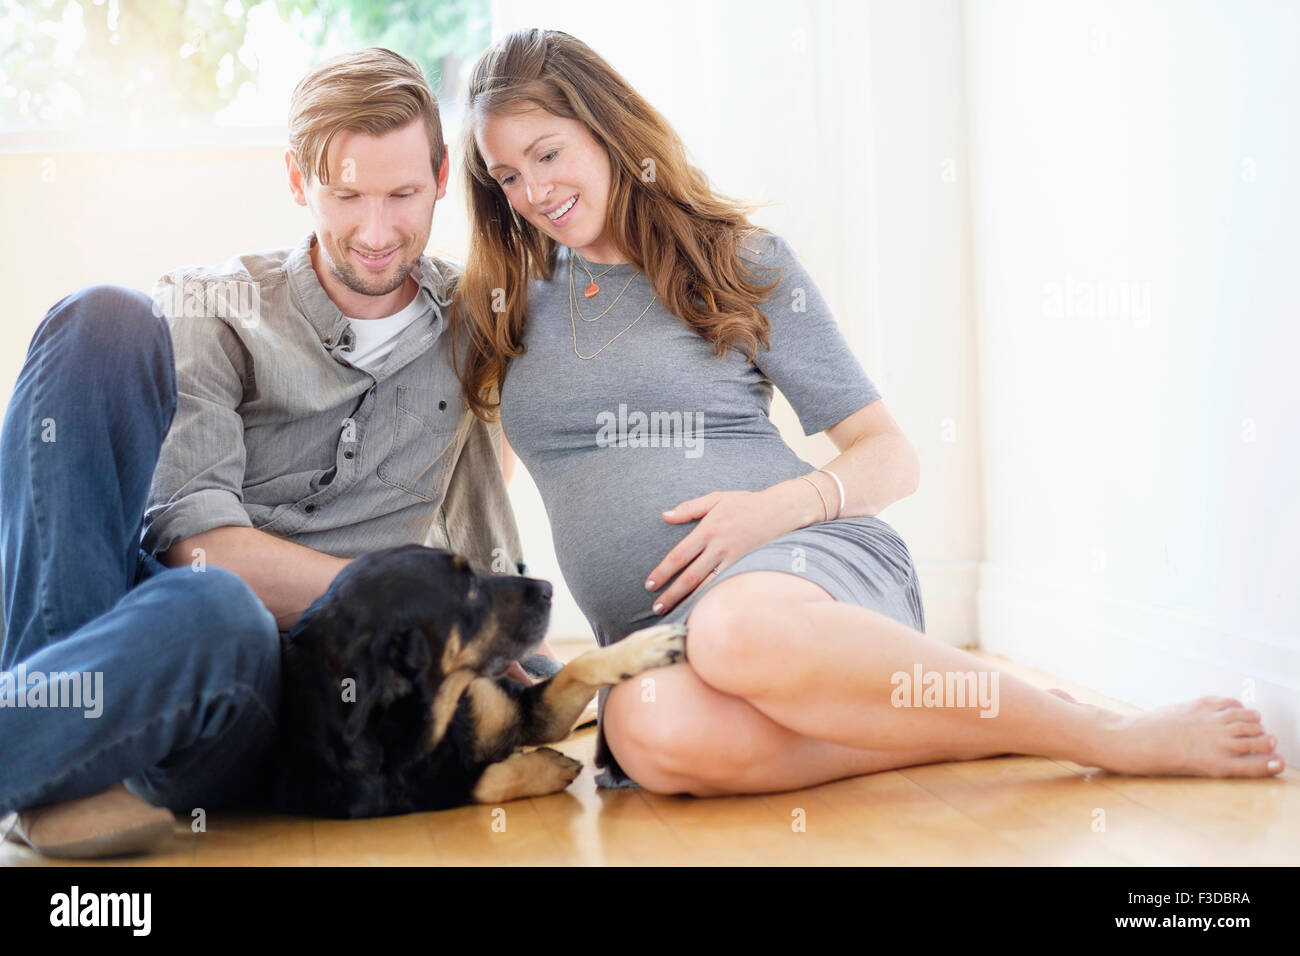 Couple relaxing with dog on floor Stock Photo